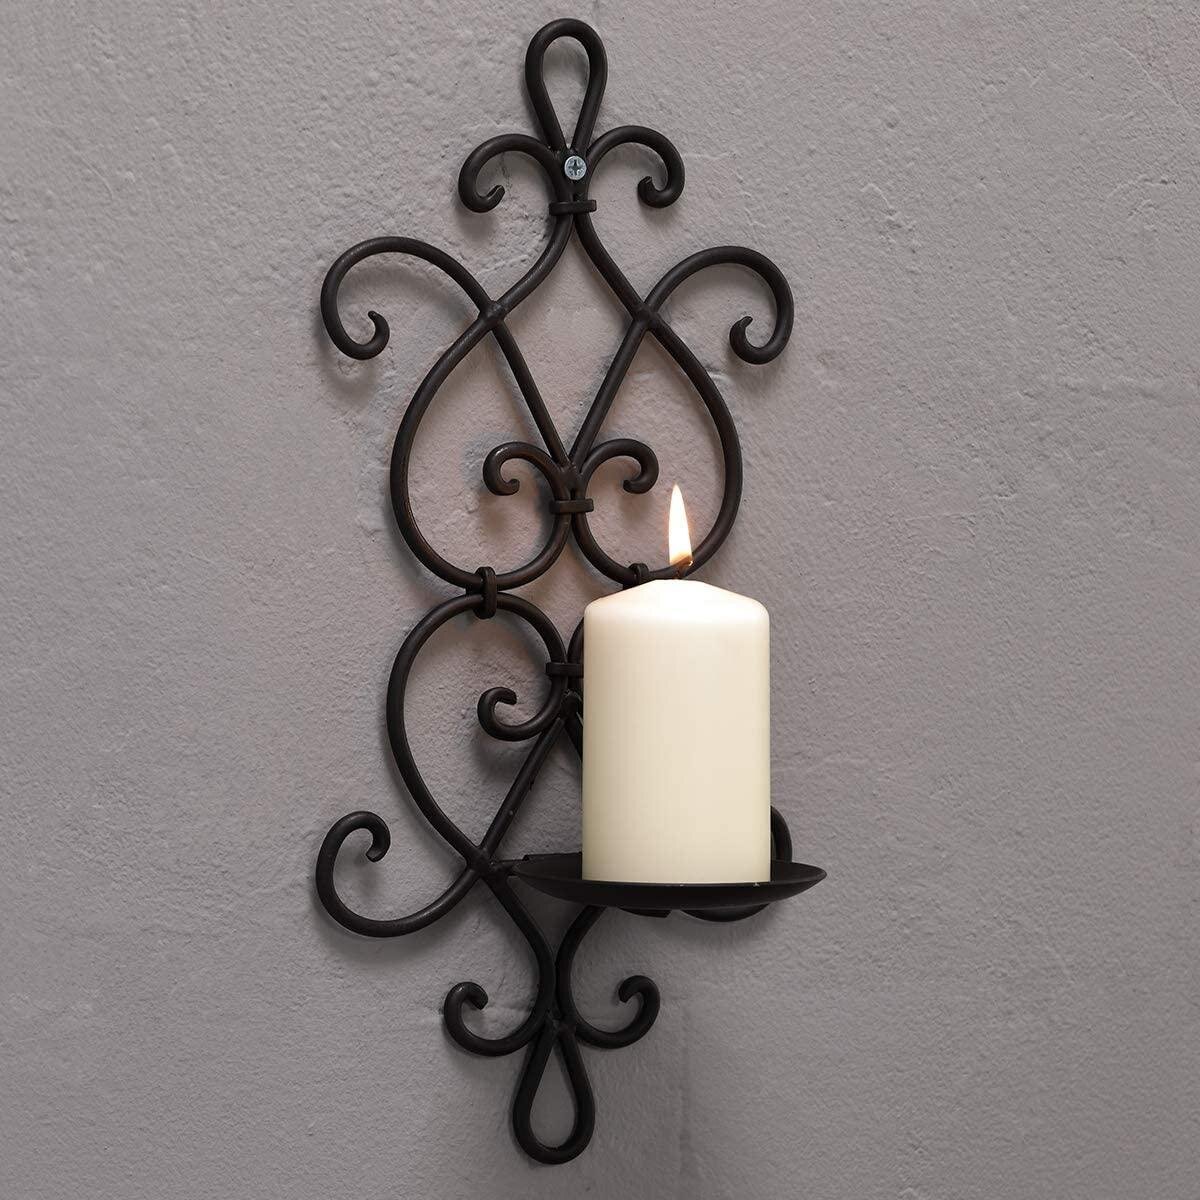 Iron Candle Wall Sconce Holder Black Sconces 2 Set Decor Metal Pair Hanging Home 